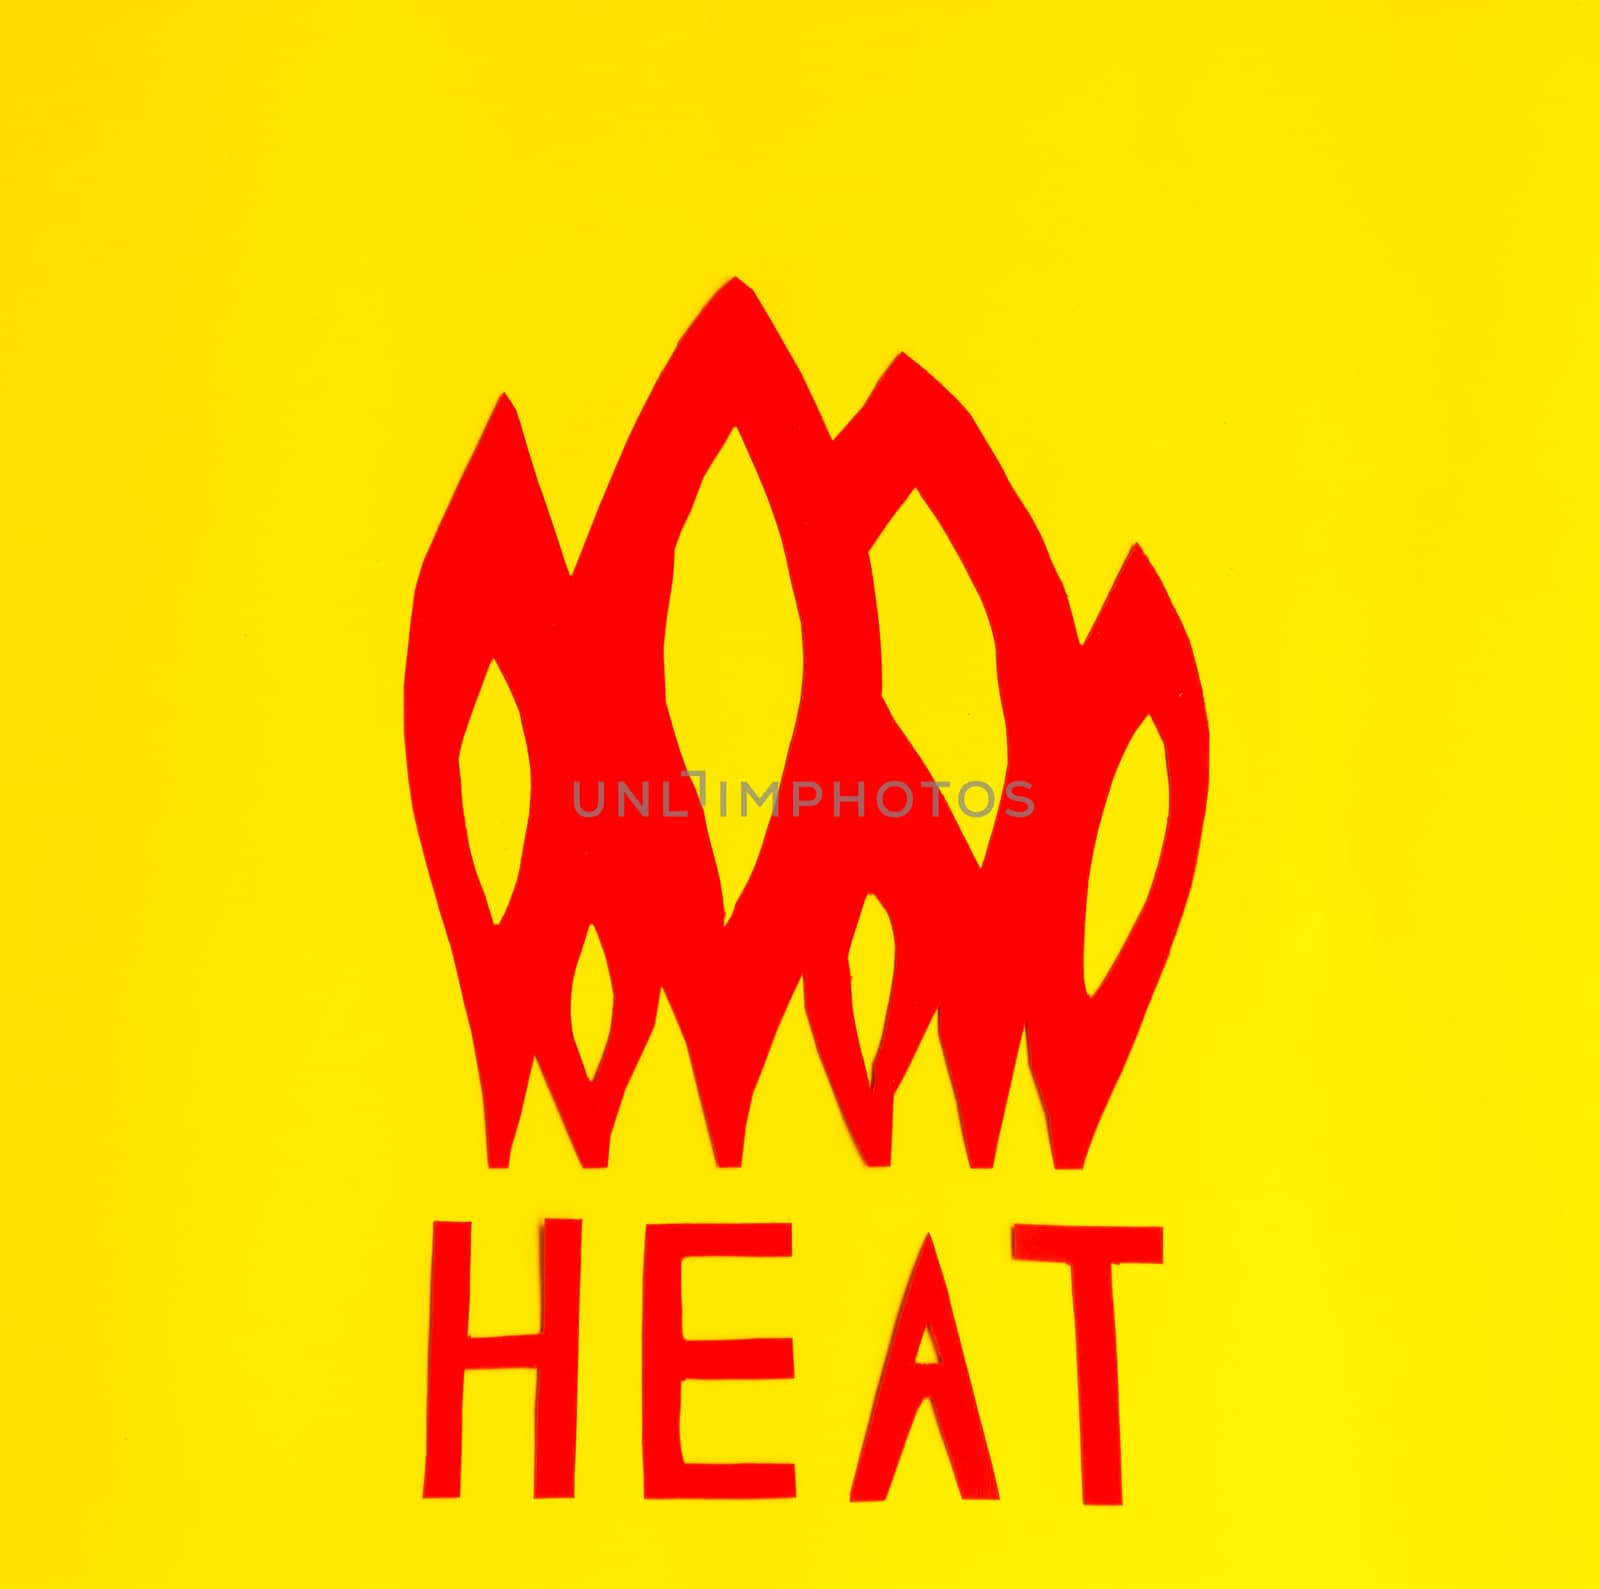 the heat writing with red flames is highlighted by the yellow background